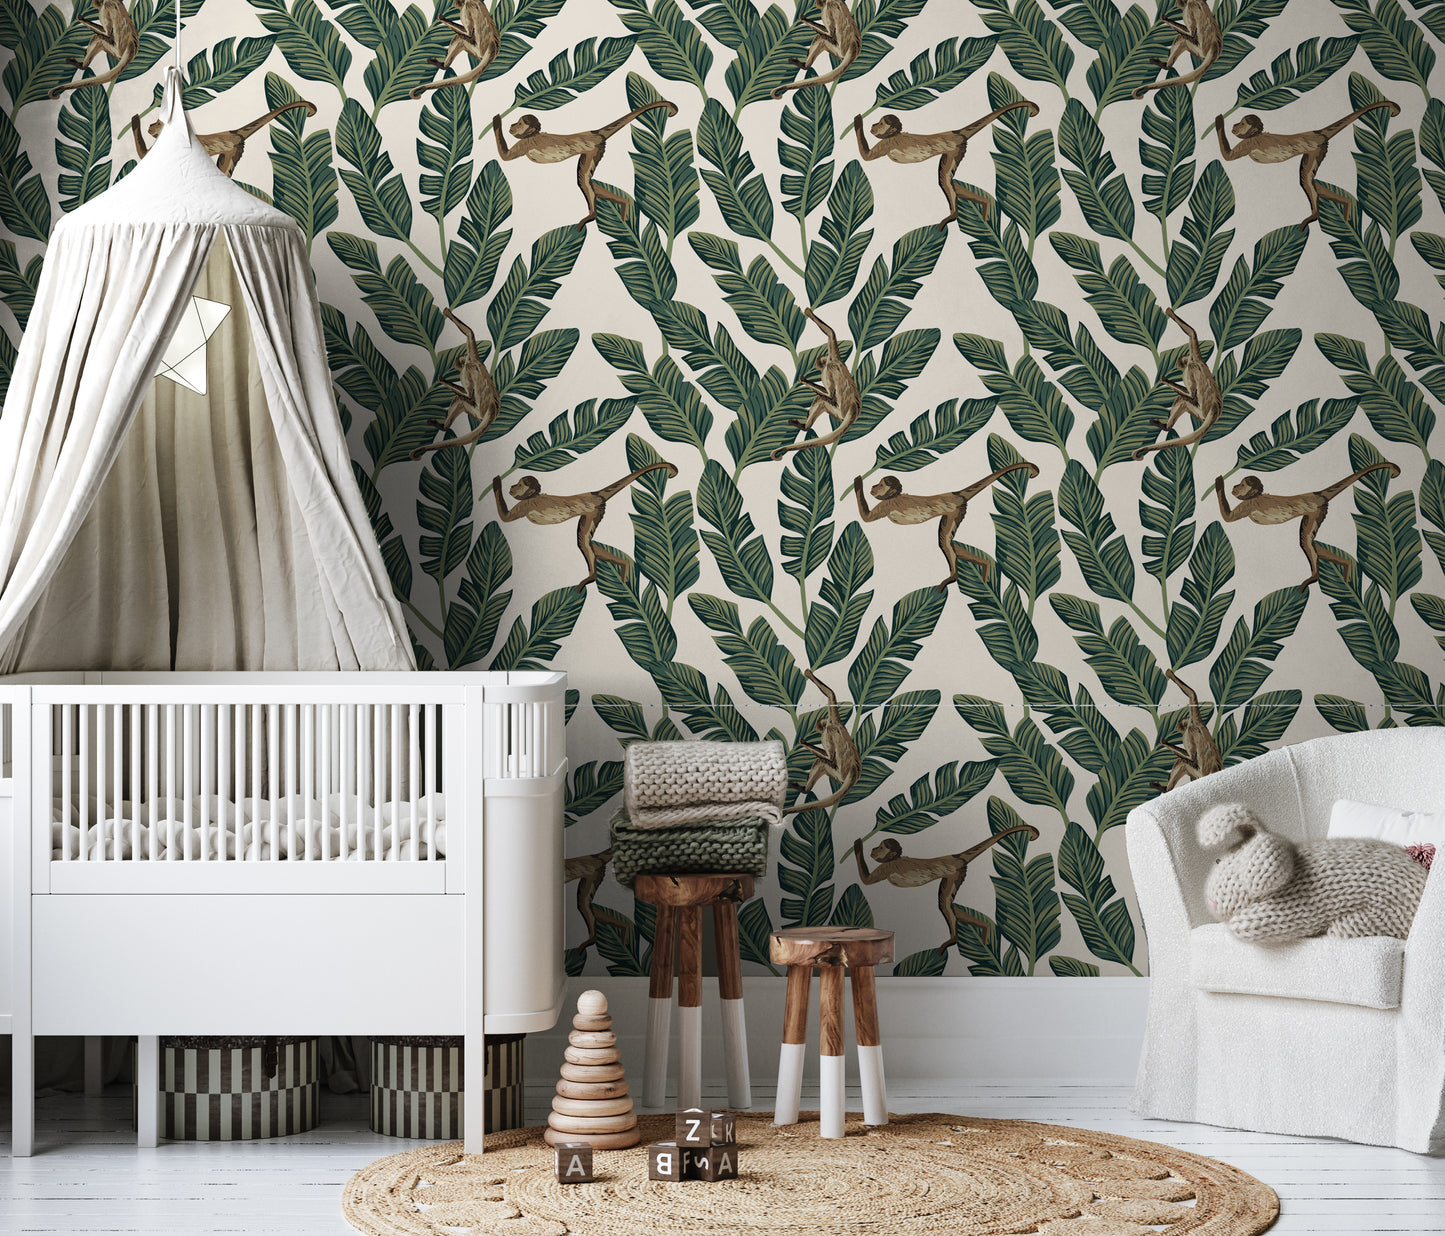 Banana leaf and monkey removable peel and stick wallpaper in nursery